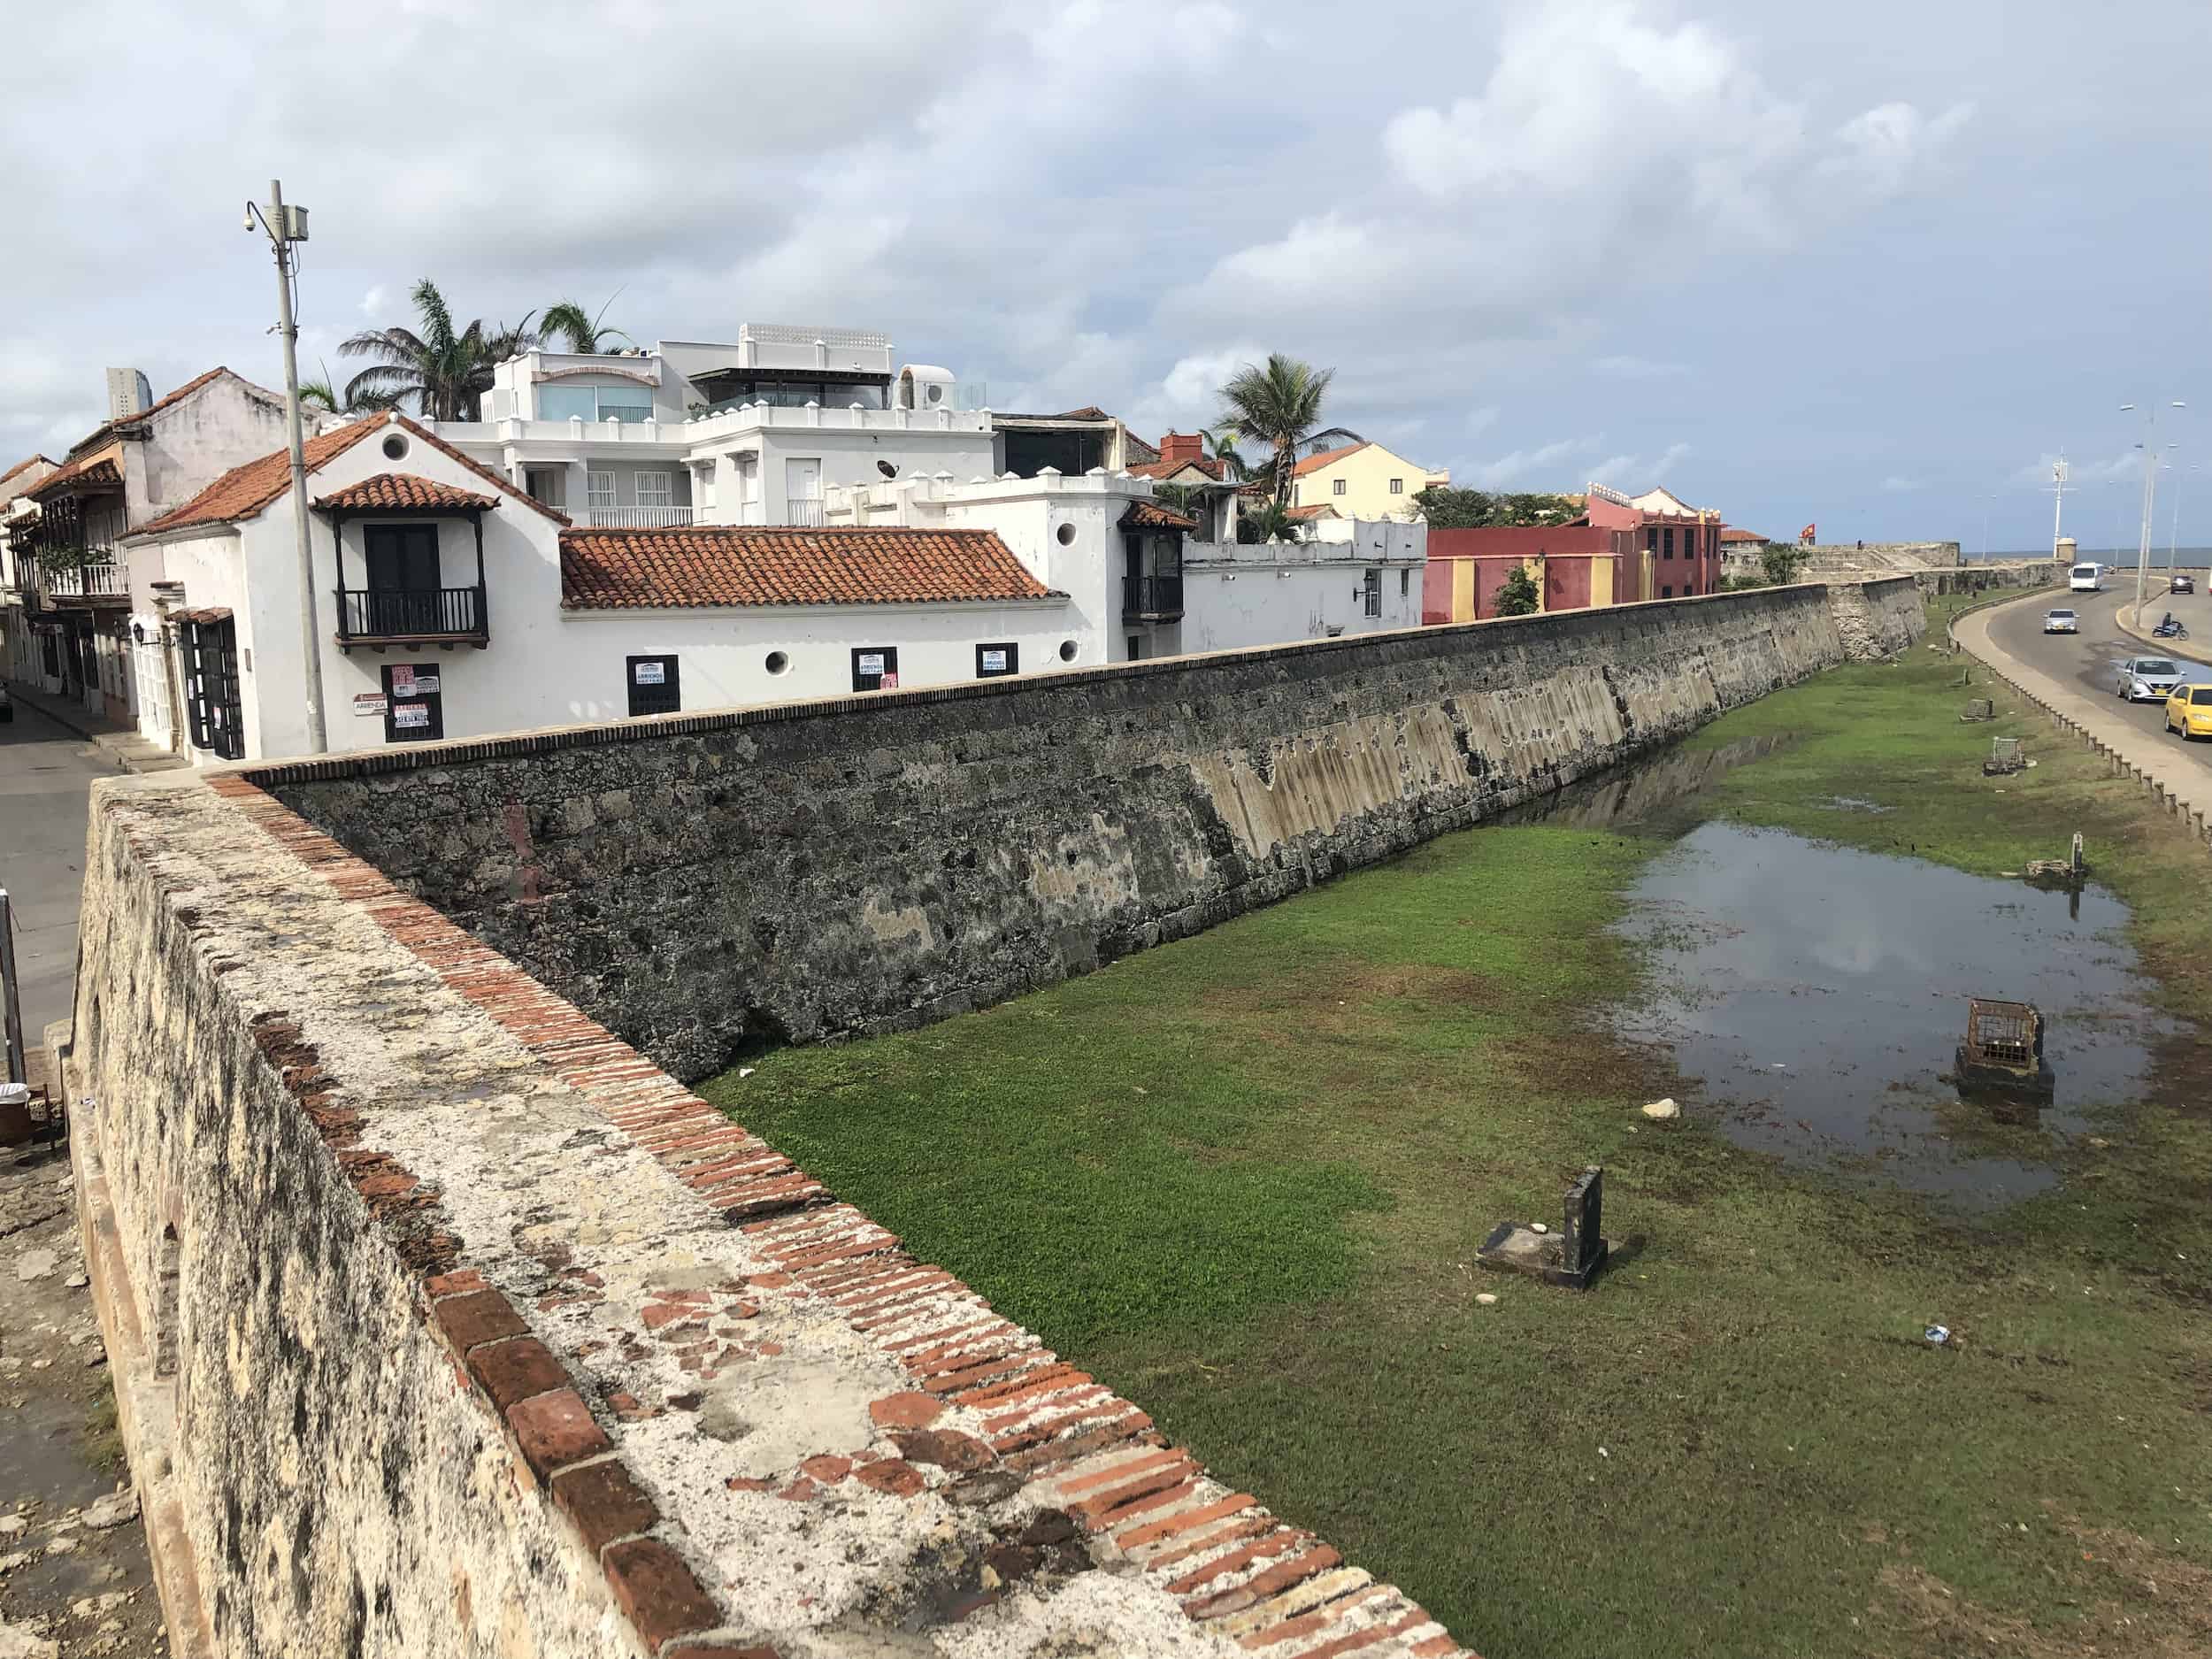 Marine Wall on the Walls of Cartagena, Colombia